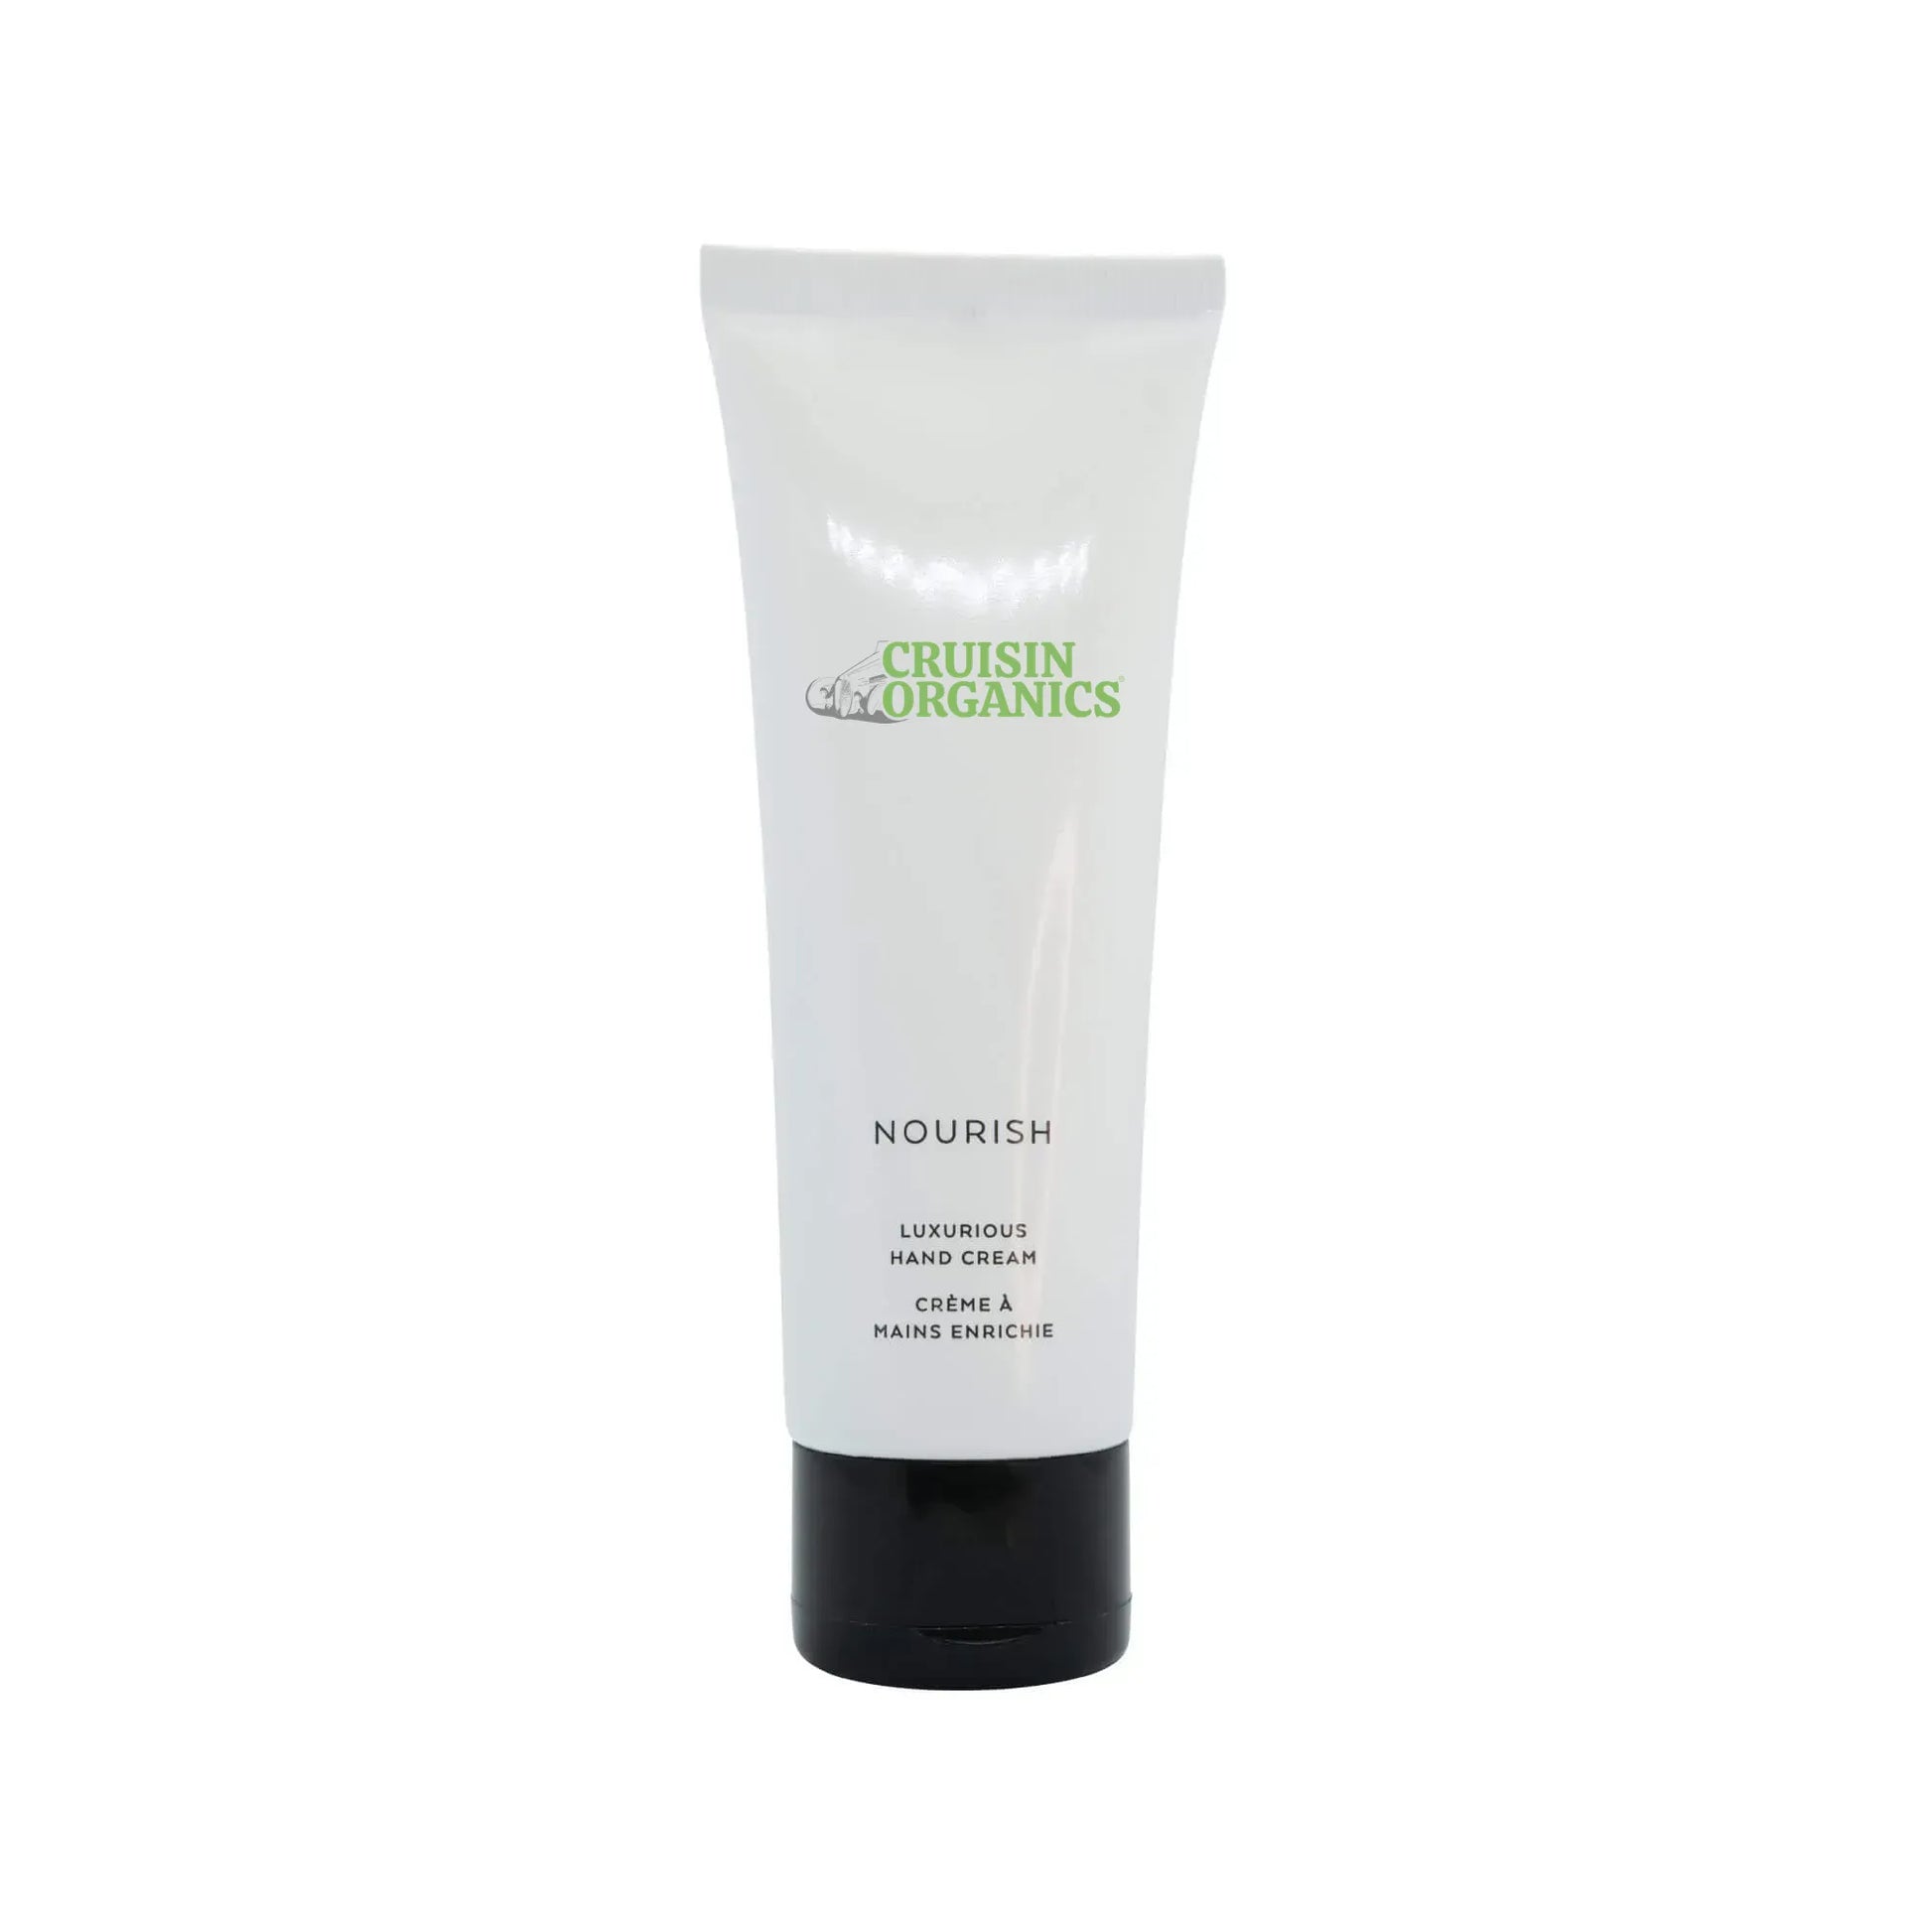 Cruisin Organics Hand Cream. Enhance your hand care routine with our nourishing hand cream. Infused with botanical oils, this lightly-scented cream provides optimal hydration and works to improve skin health by increasing blood flow and targeting common signs of aging. With added vitamins A, C, D, and E, your hands will feel softer and look healthier than ever before.